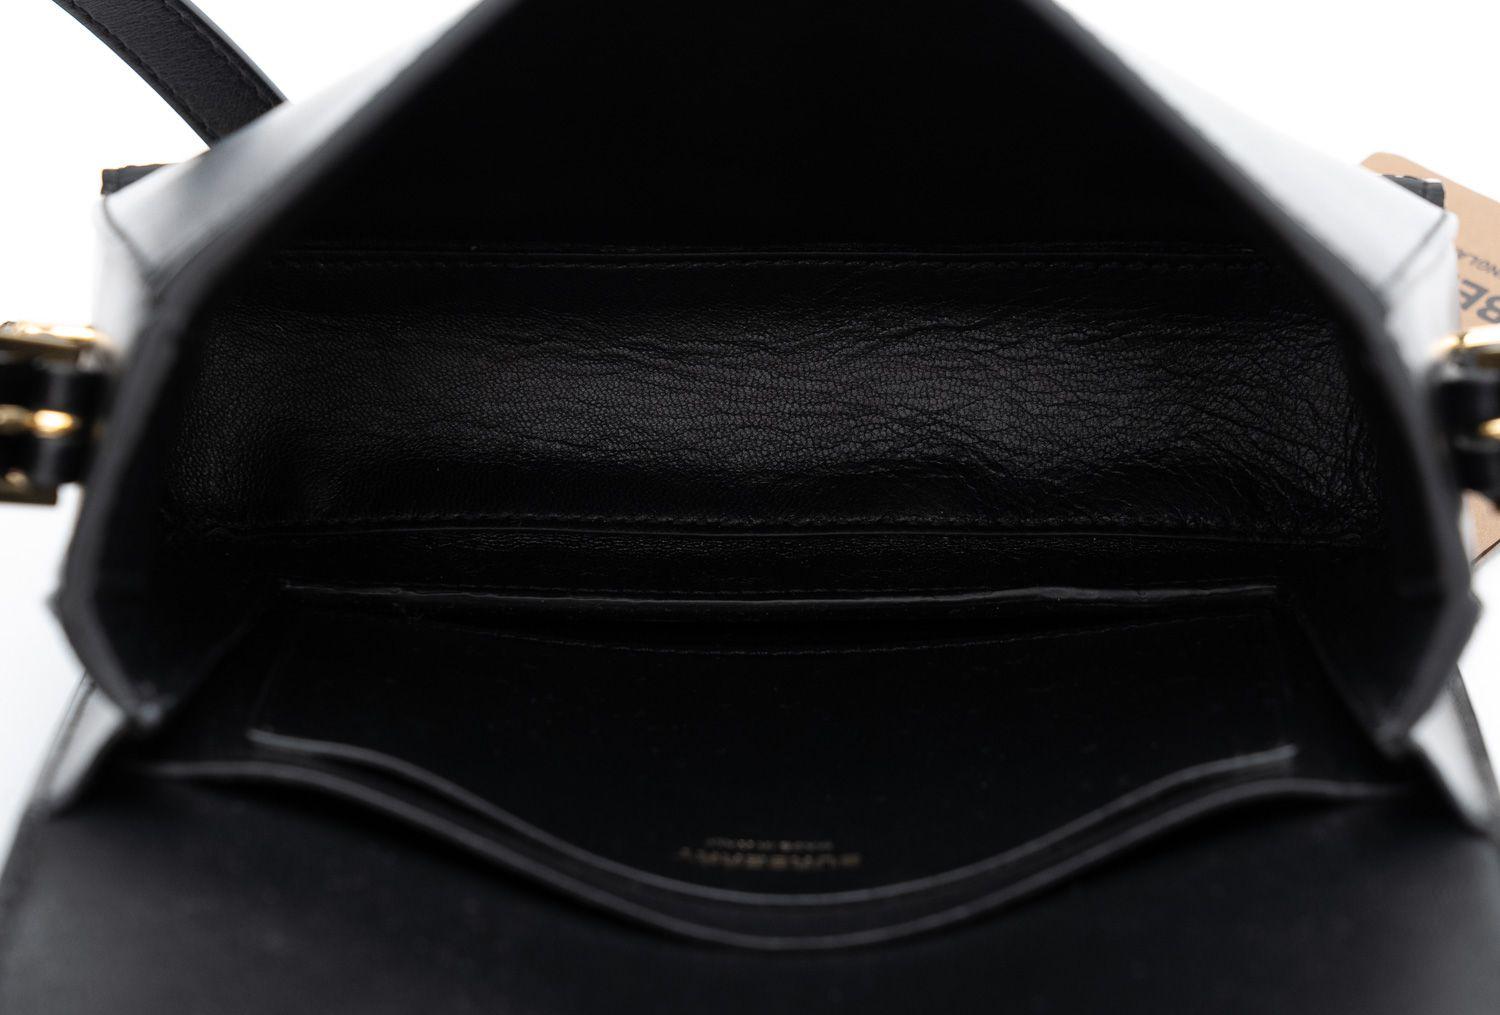 Burberry New Calfskin Black Cheetah Bag In New Condition For Sale In West Hollywood, CA